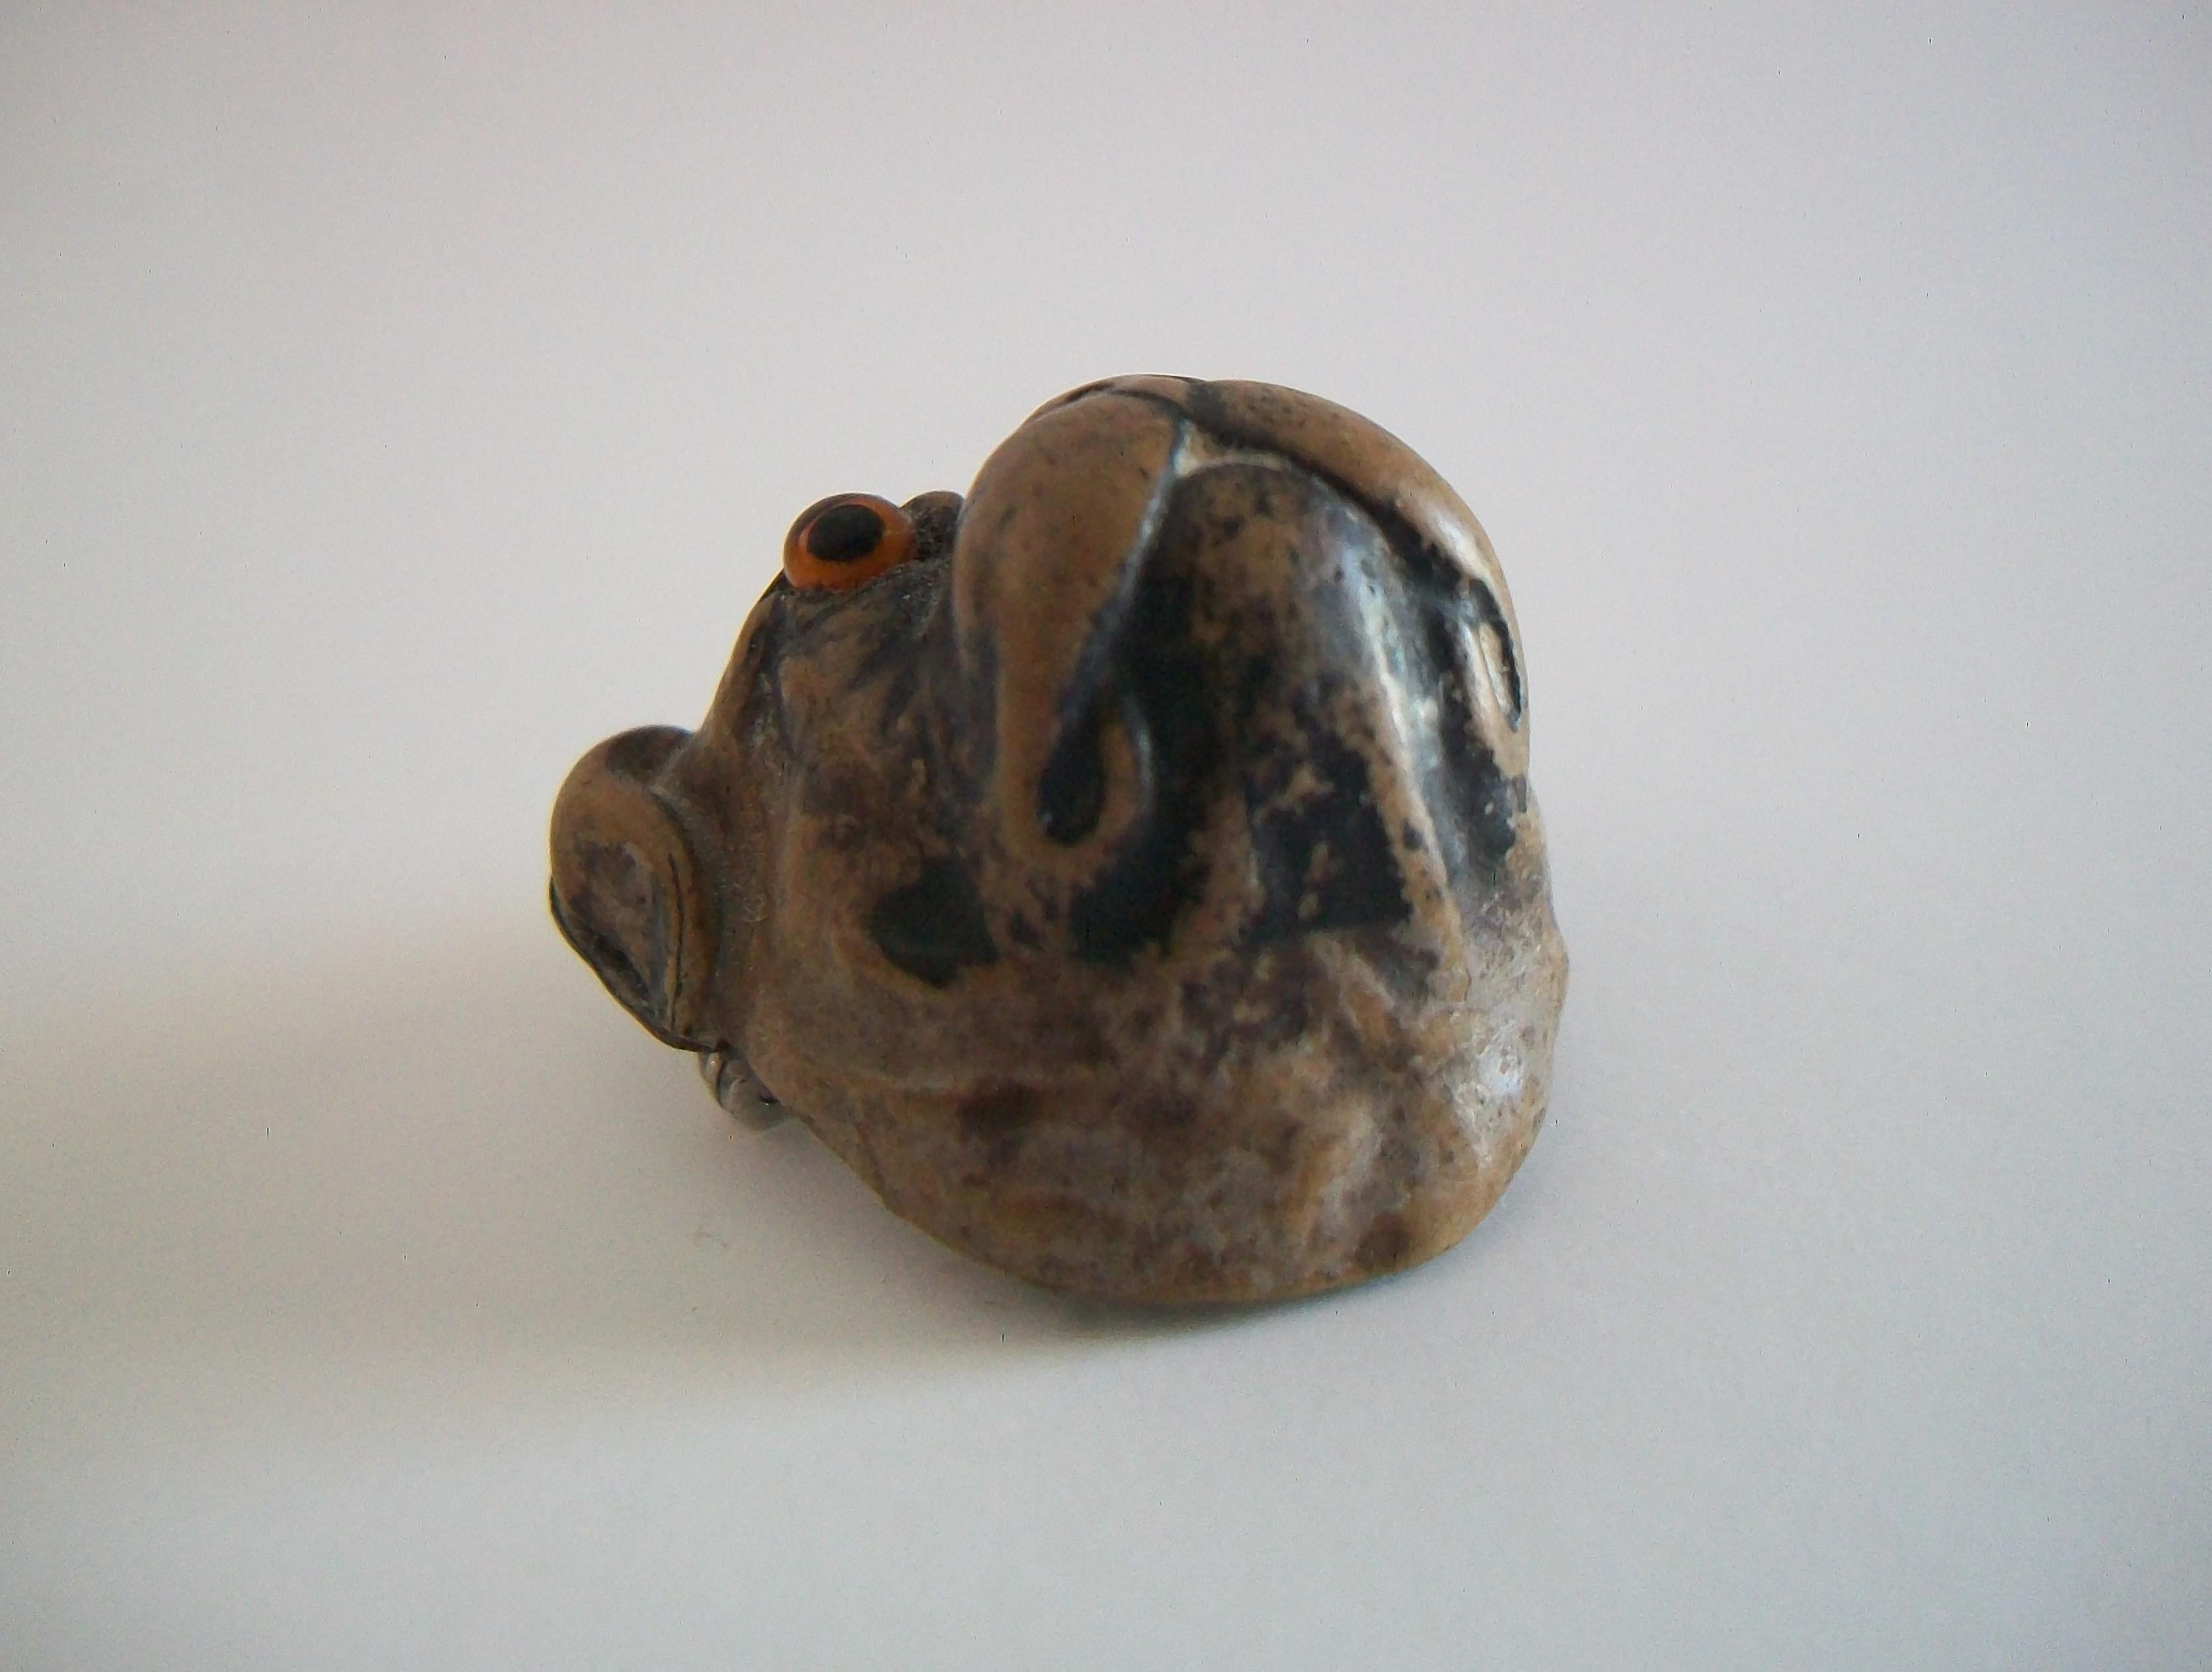 Vintage Glazed Ceramic 'Bull Dog' Brooch/Pin - Glass Eyes - Early 20th Century For Sale 3